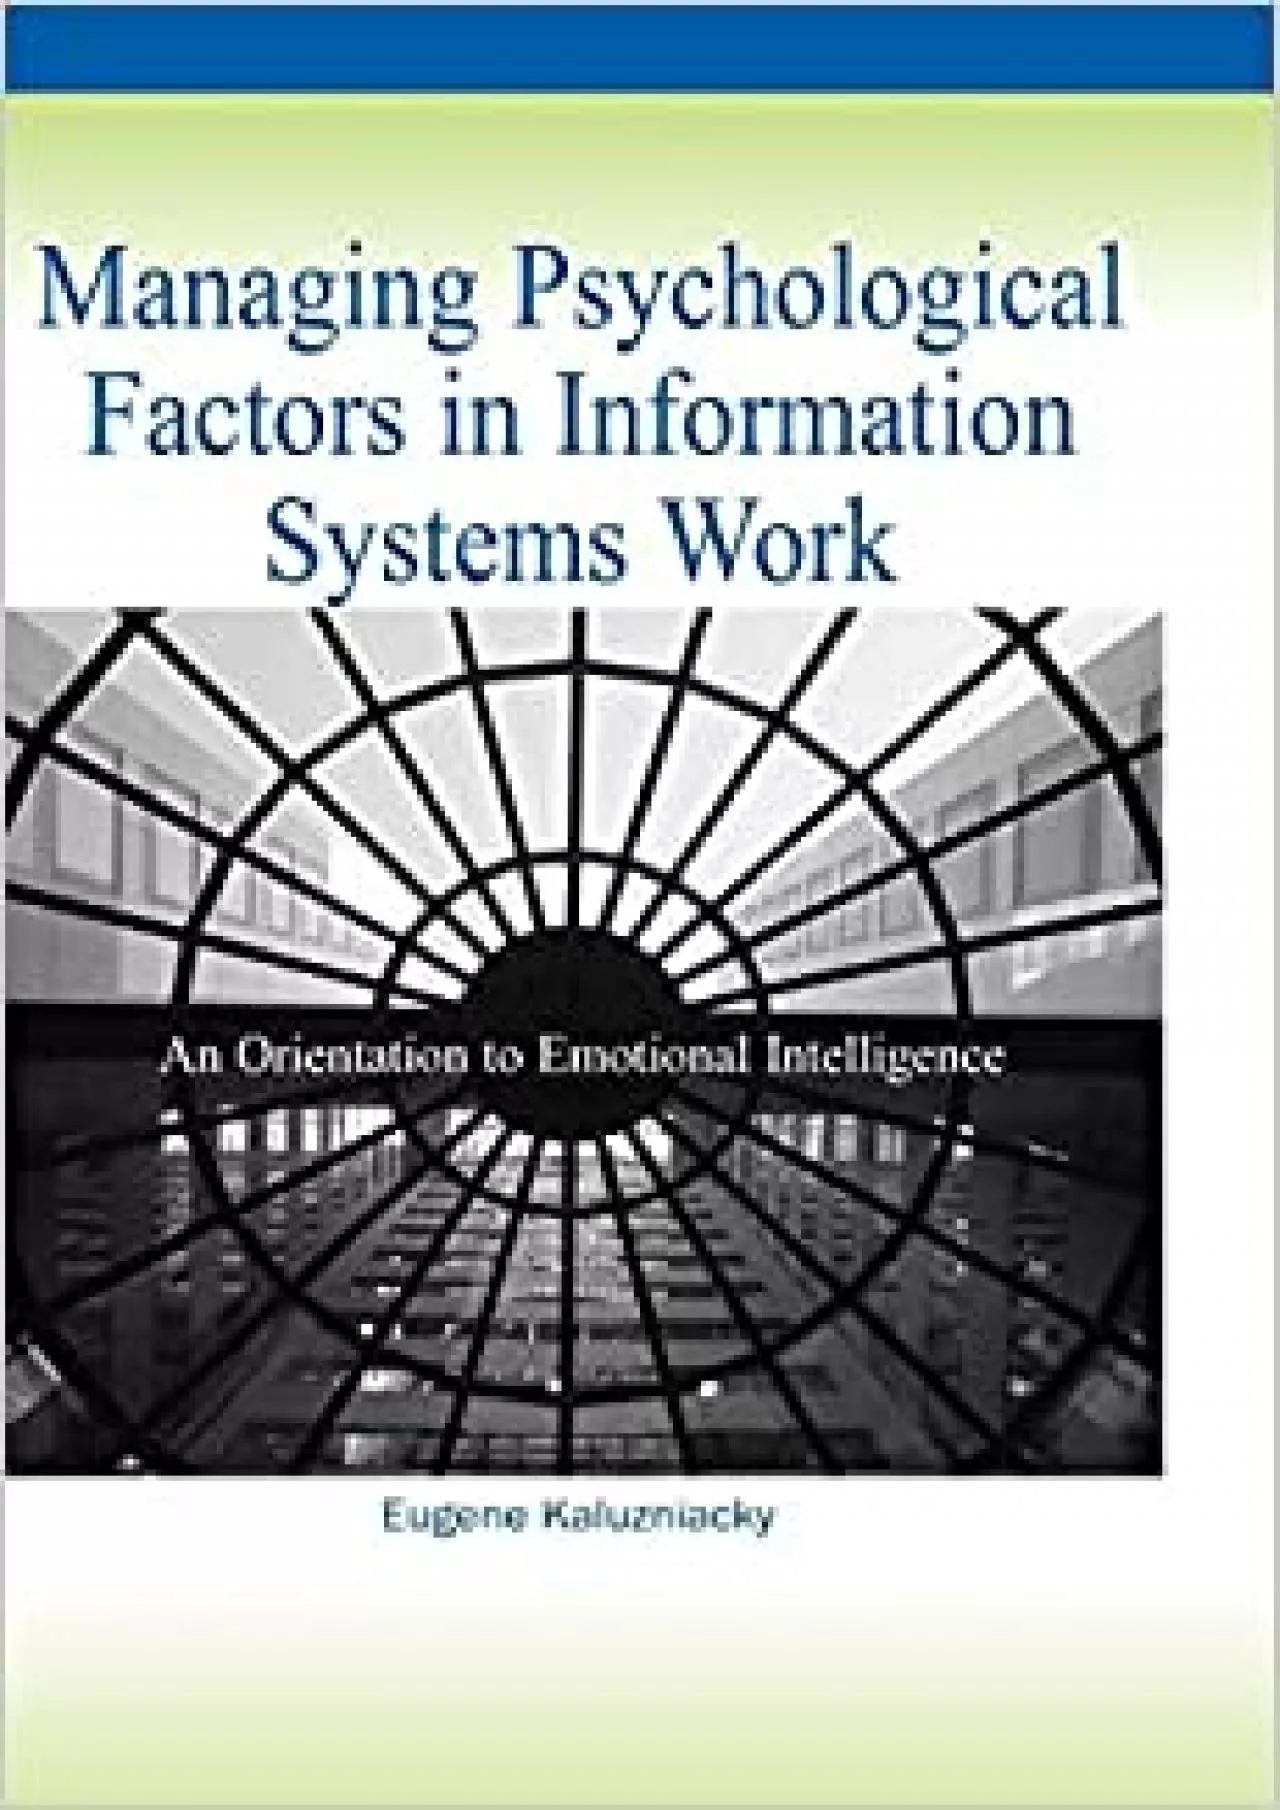 (DOWNLOAD)-Managing Psychological Factors in Information Systems Work An Orientation to